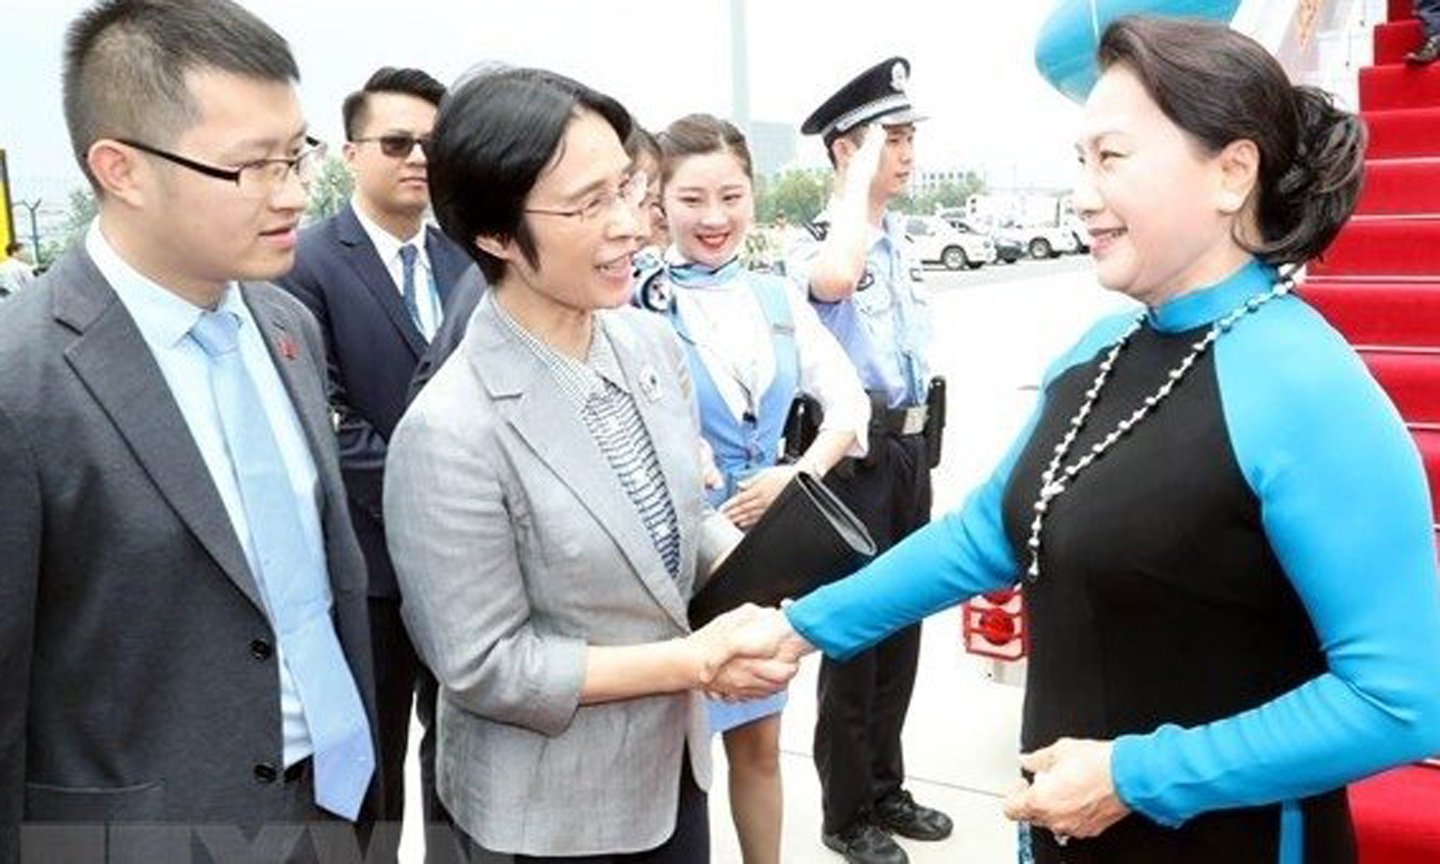 Chairwoman of the National Assembly Nguyen Thi Kim Ngan is welcomed at the airport by Jiang Xiaojuan, Vice Chairperson of the Committee for Social Construction of the NPC, and officials of Jiangsu. (Photo: VNA)